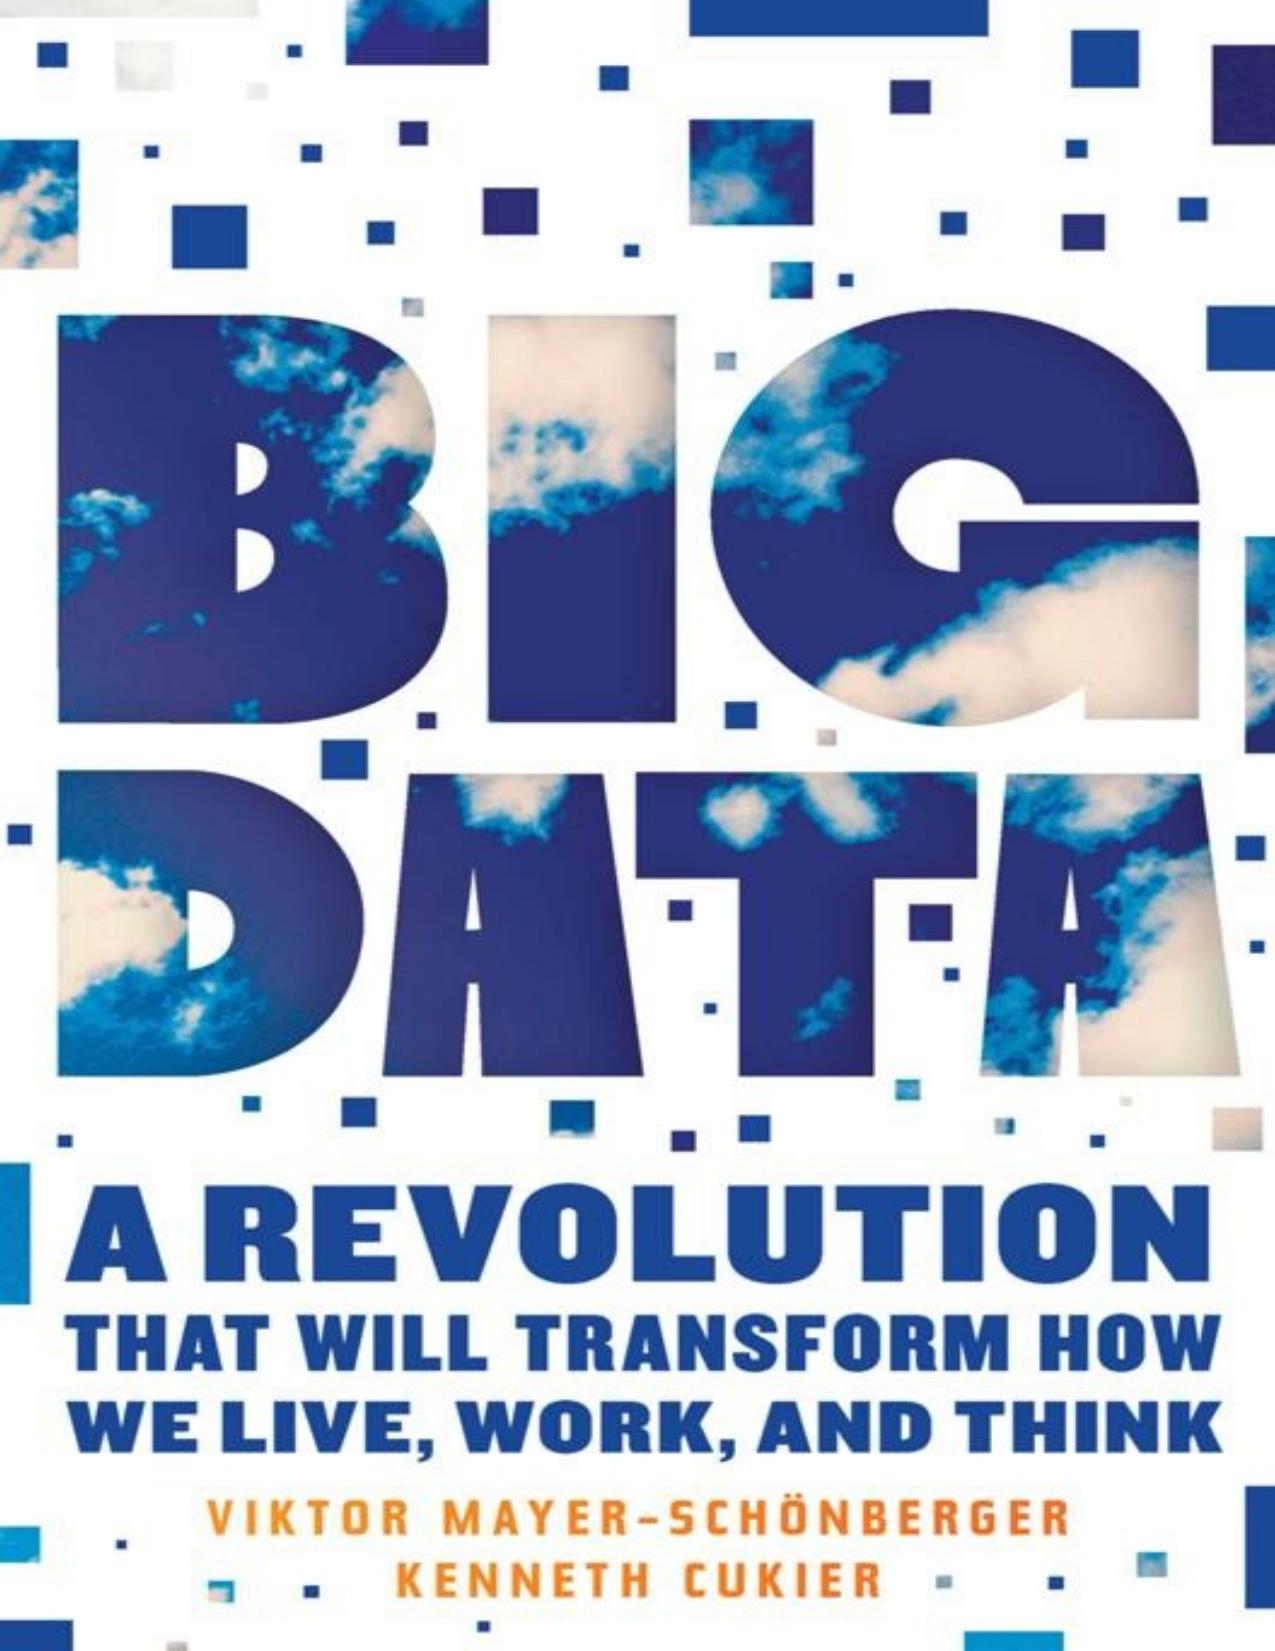 Big Data: A Revolution That Will Transform How We Live, Work, and Think by Viktor Mayer-Schonberger & Kenneth Cukier